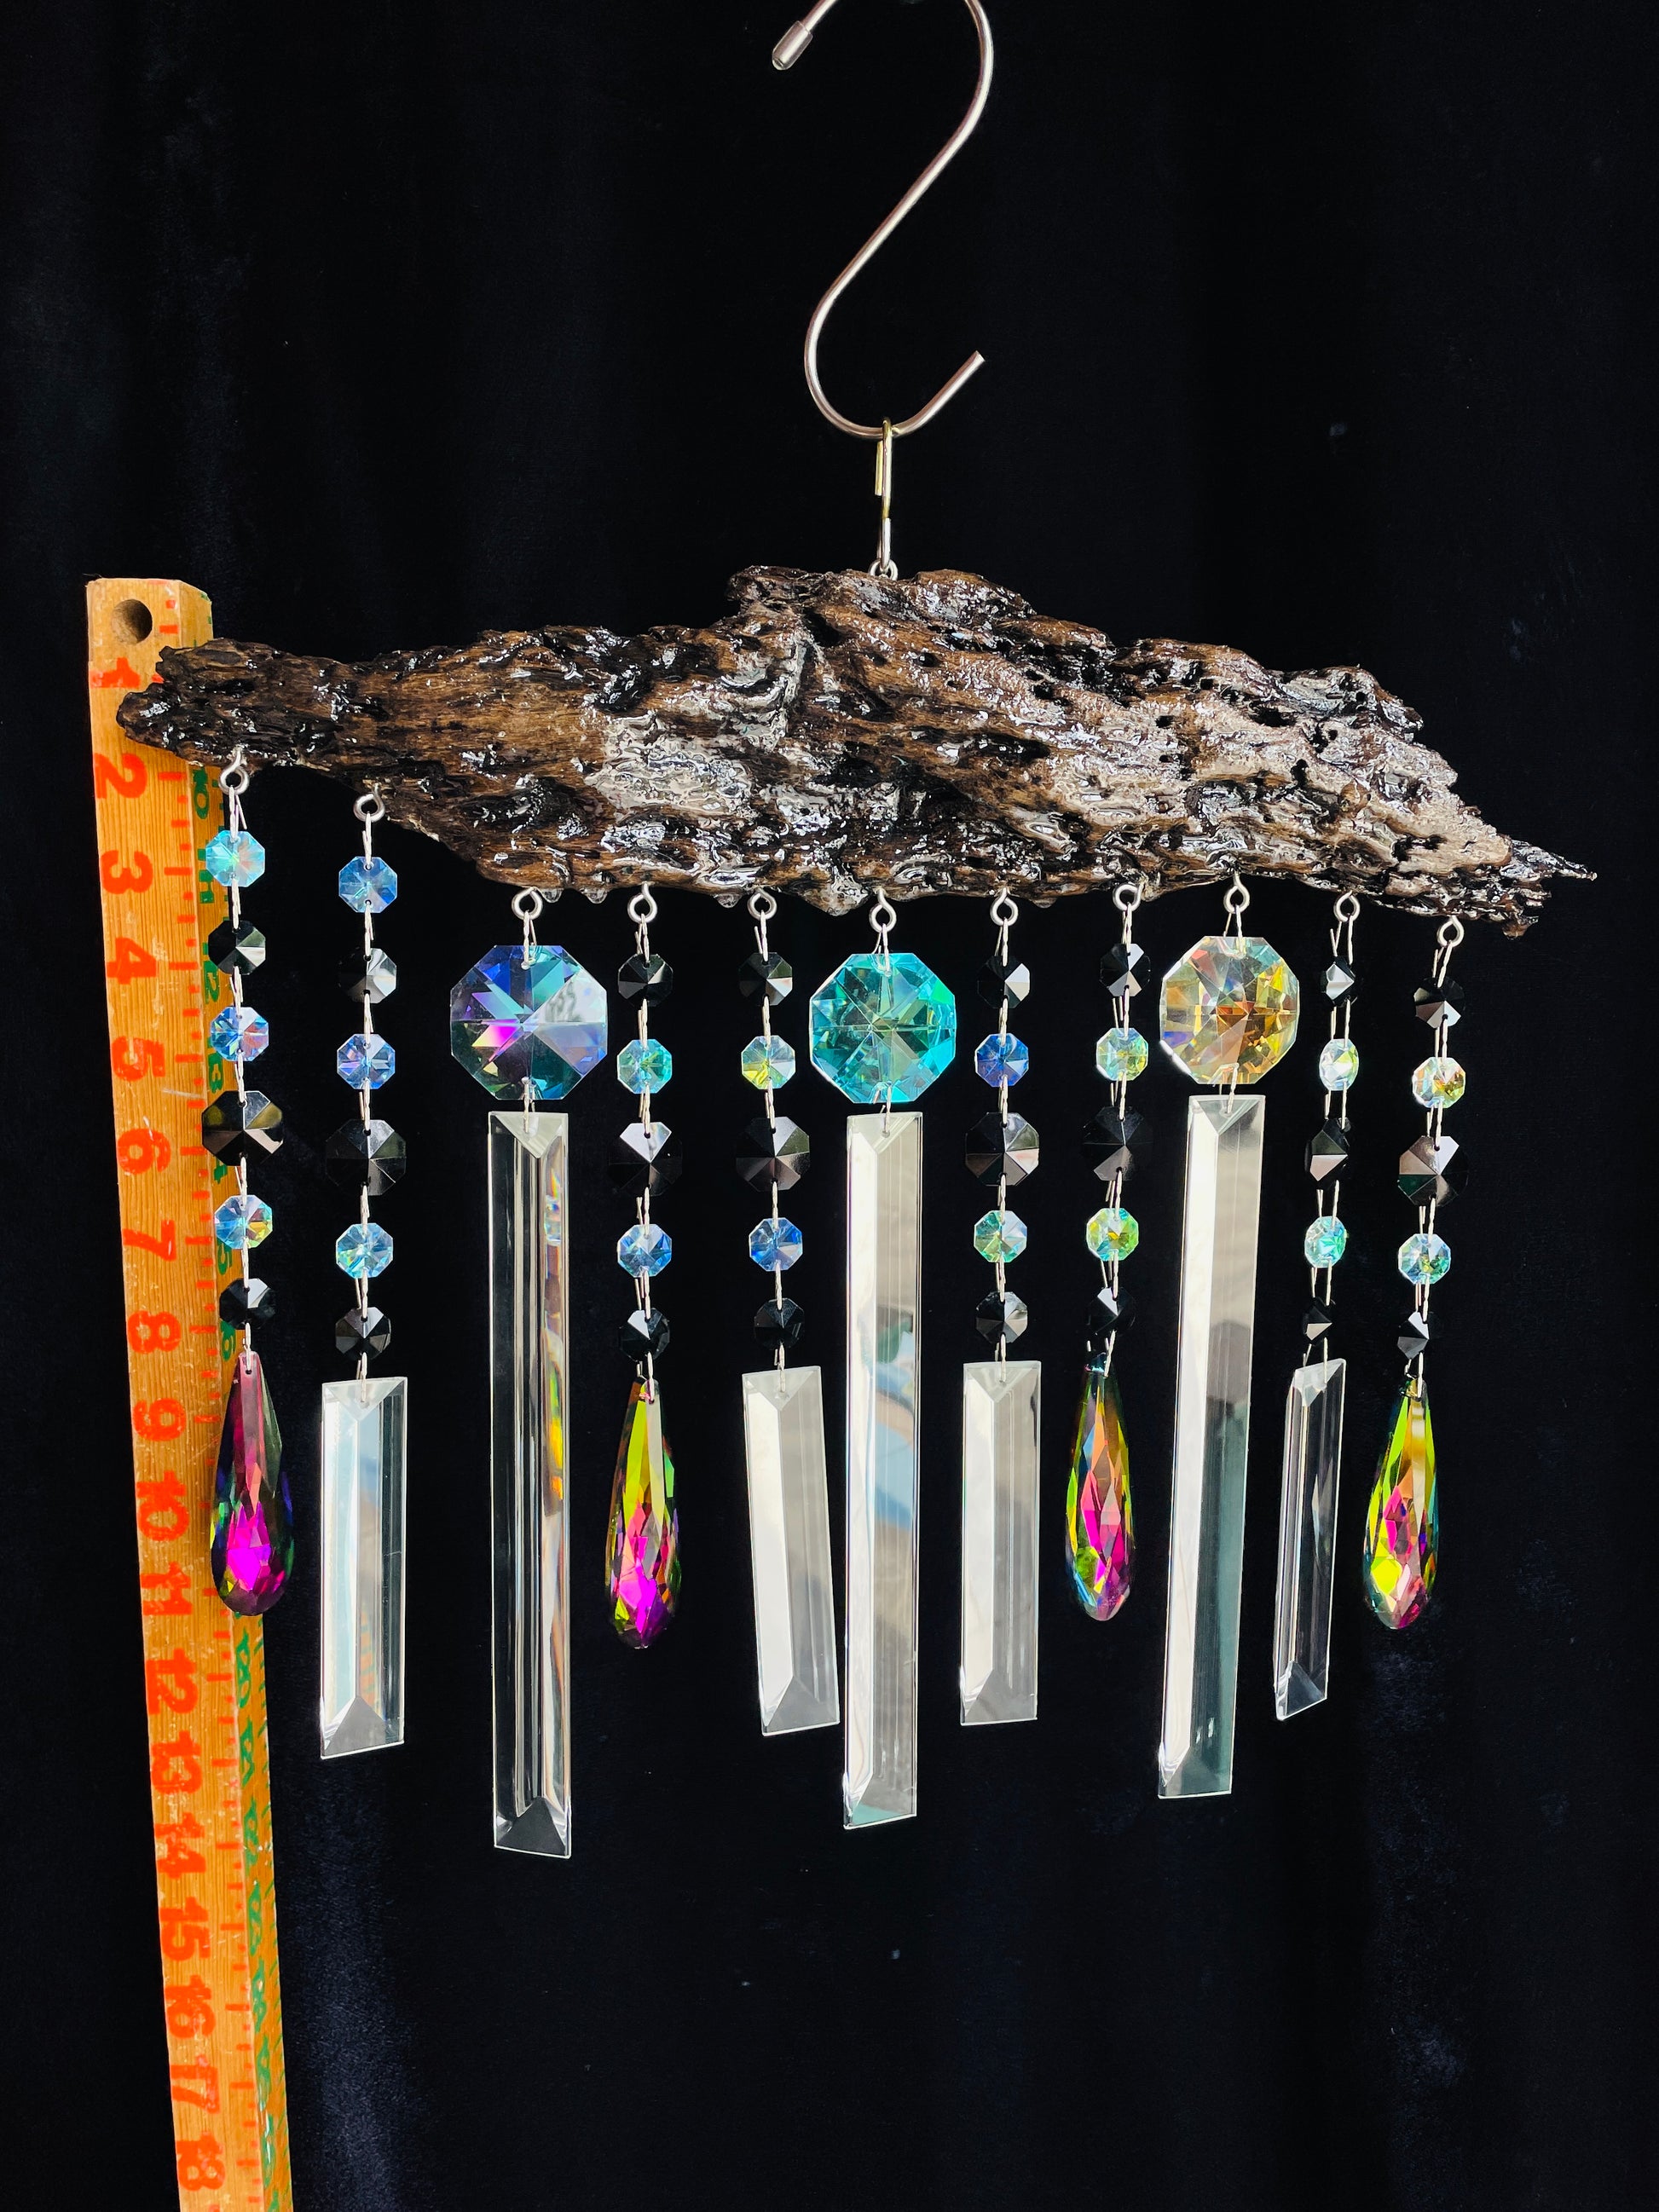 Home made unique windchime suncatcher art by Dazzling driftwoods Angel Sims